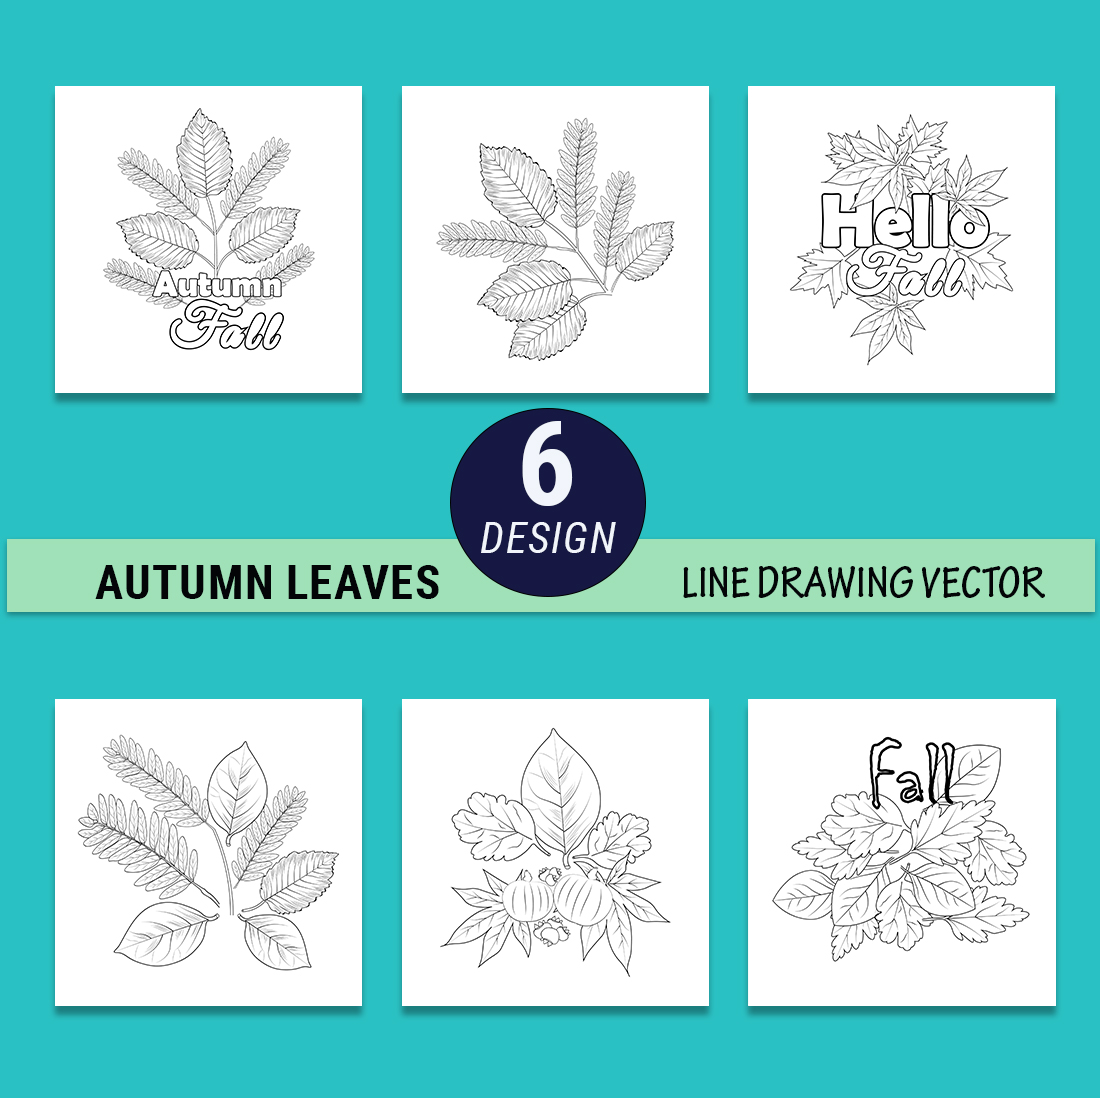 autumn coloring book for adults autumn coloring coloring book autumn leaves thanksgiving coloring pages preview image.